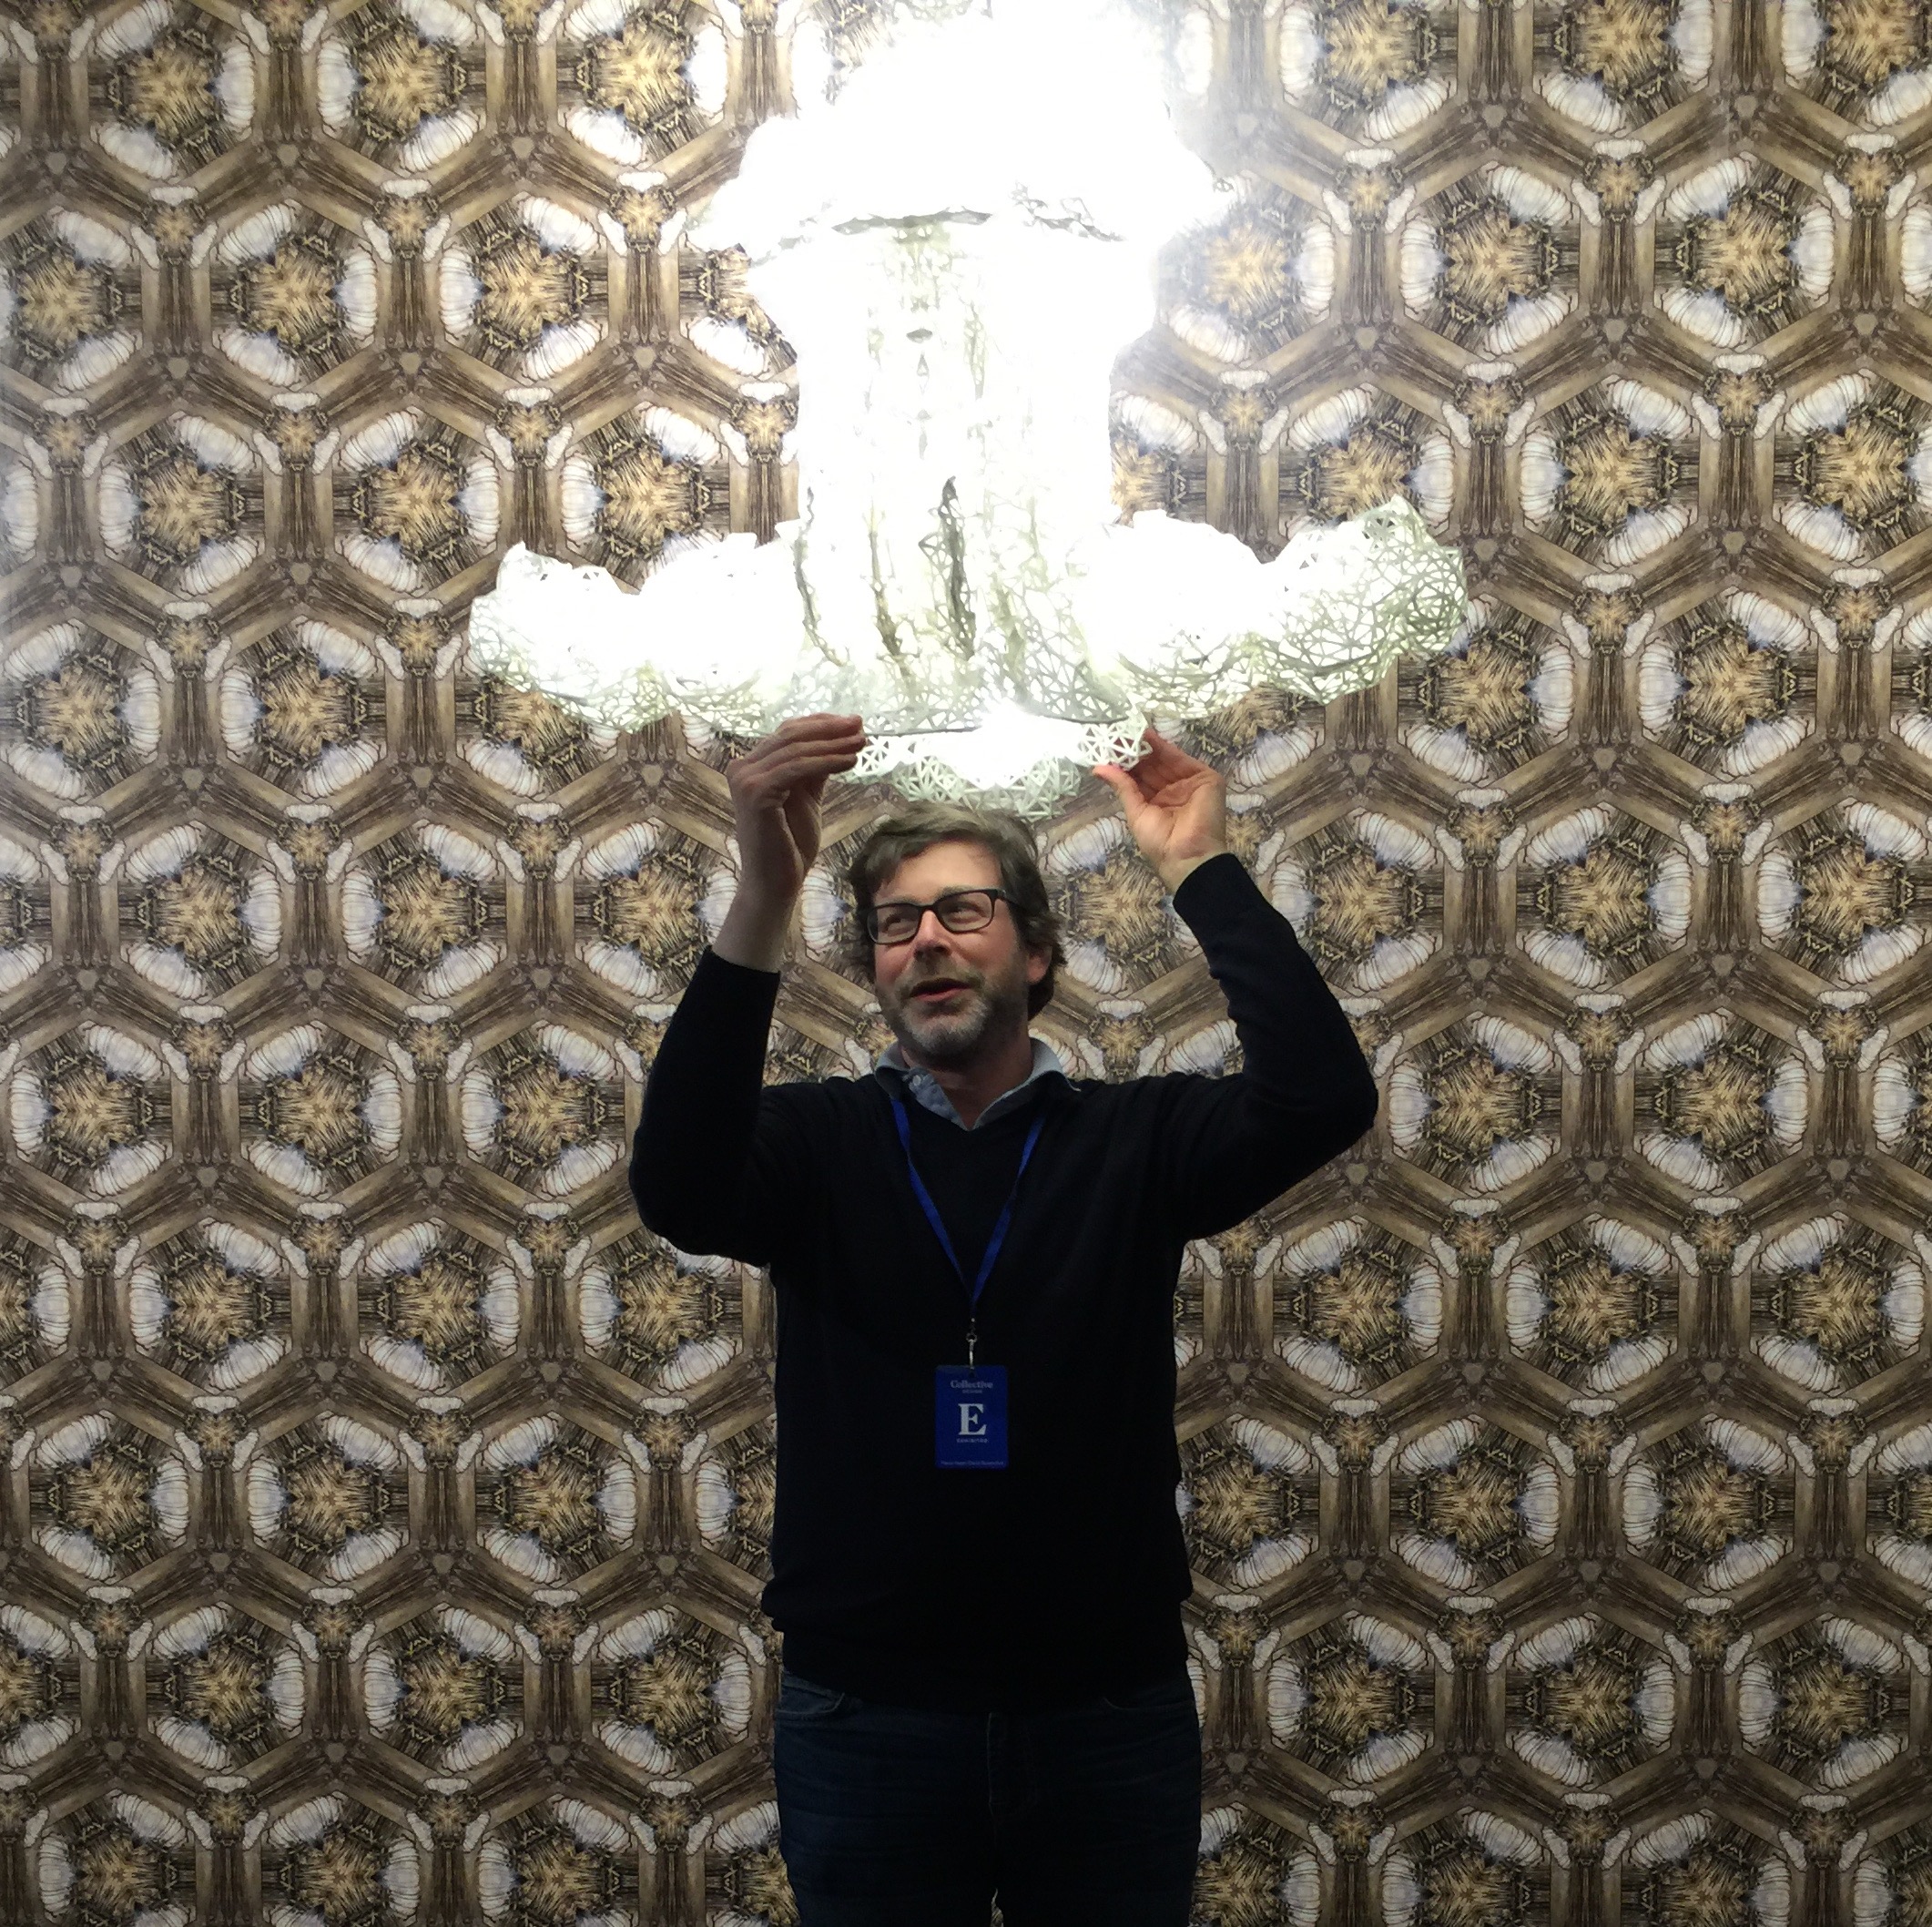 A man holding up a large glass chandelier.